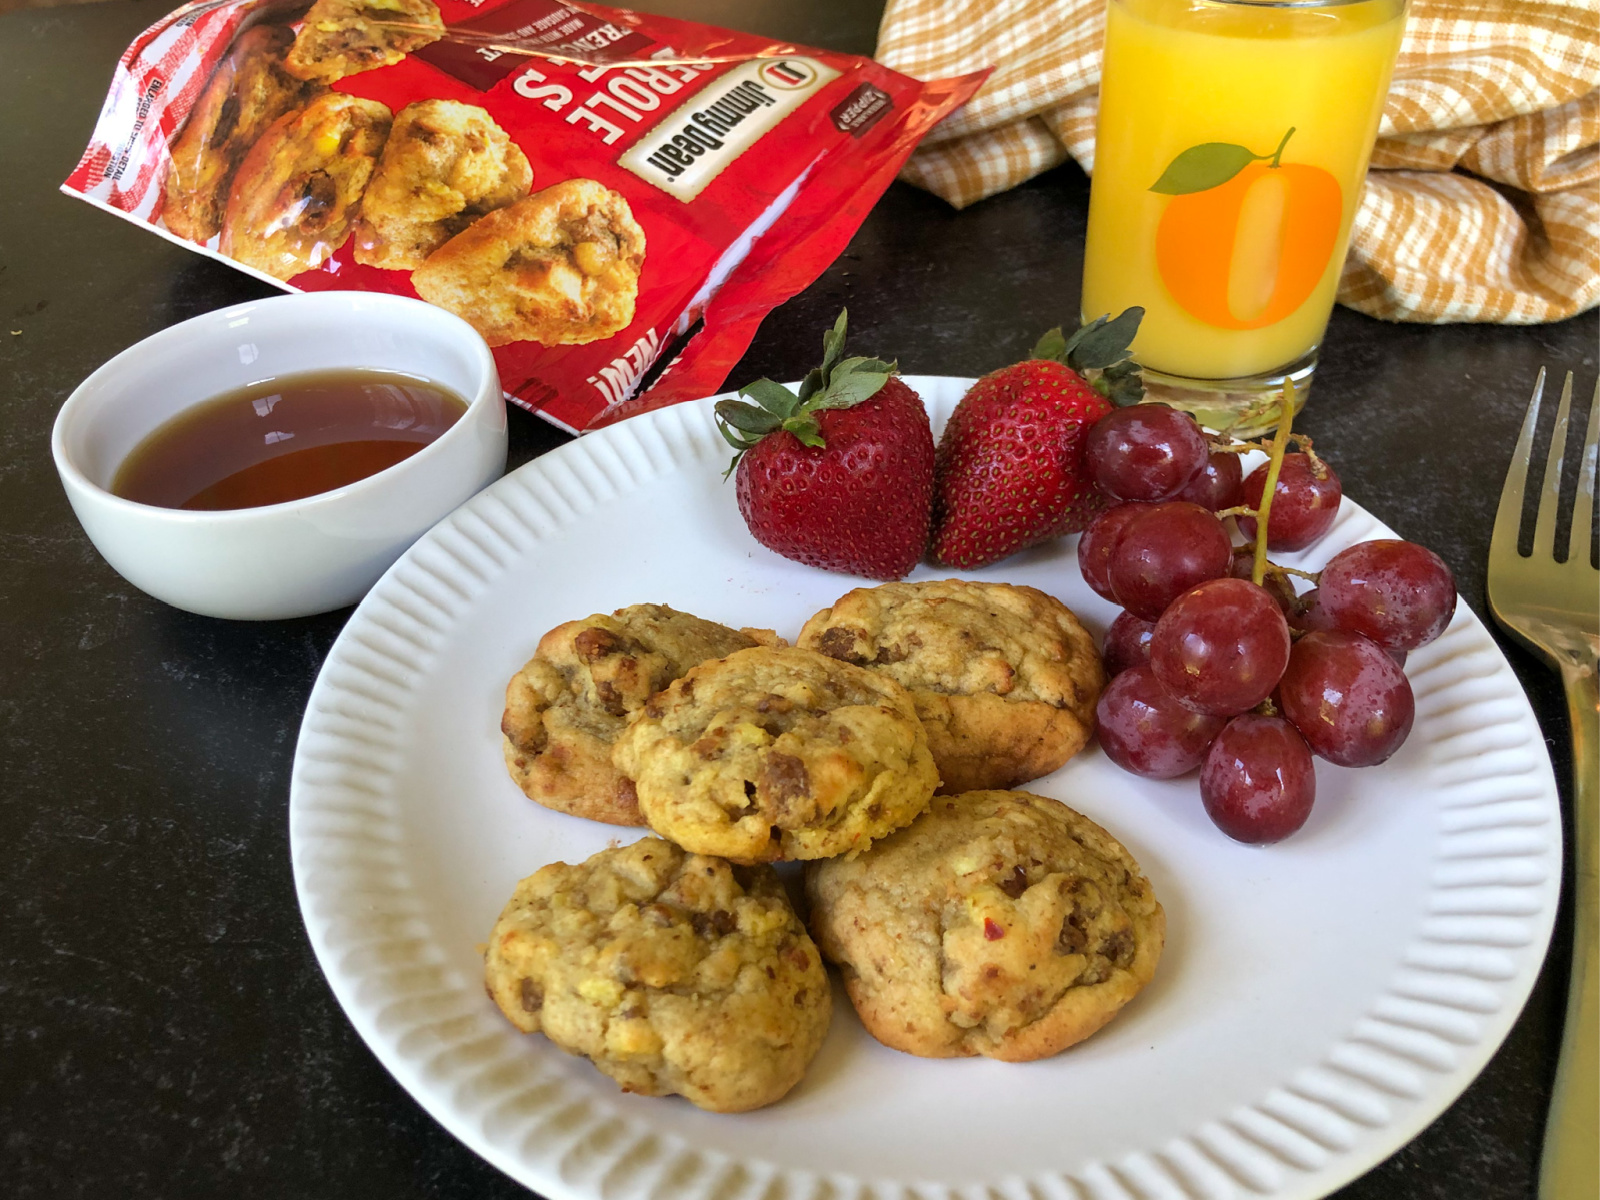 New Jimmy Dean Casserole Bites Are Now Available At Publix on I Heart Publix